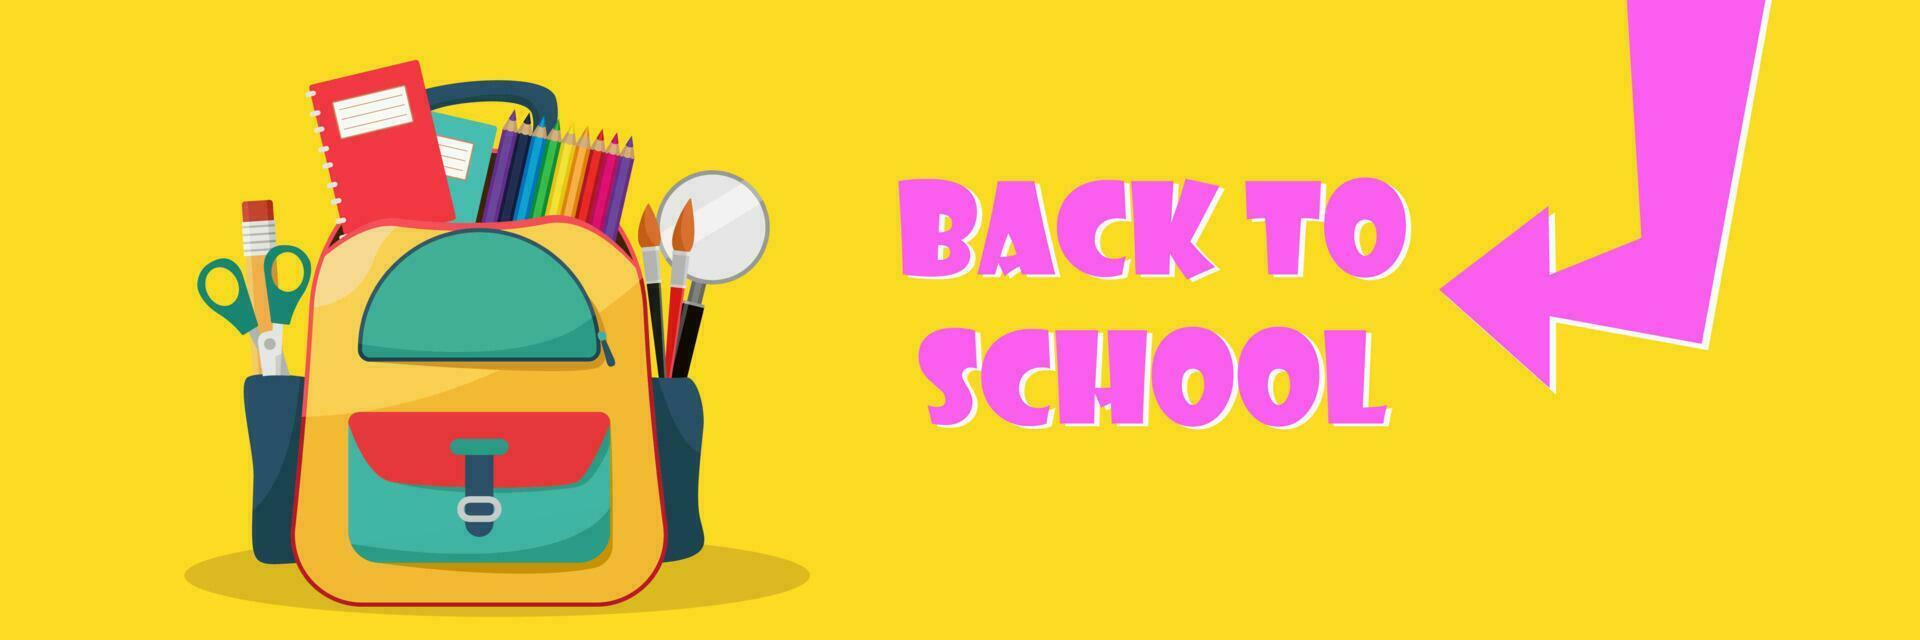 back to school sale banner, poster, flat design colorful, vector background. Education student backpack.